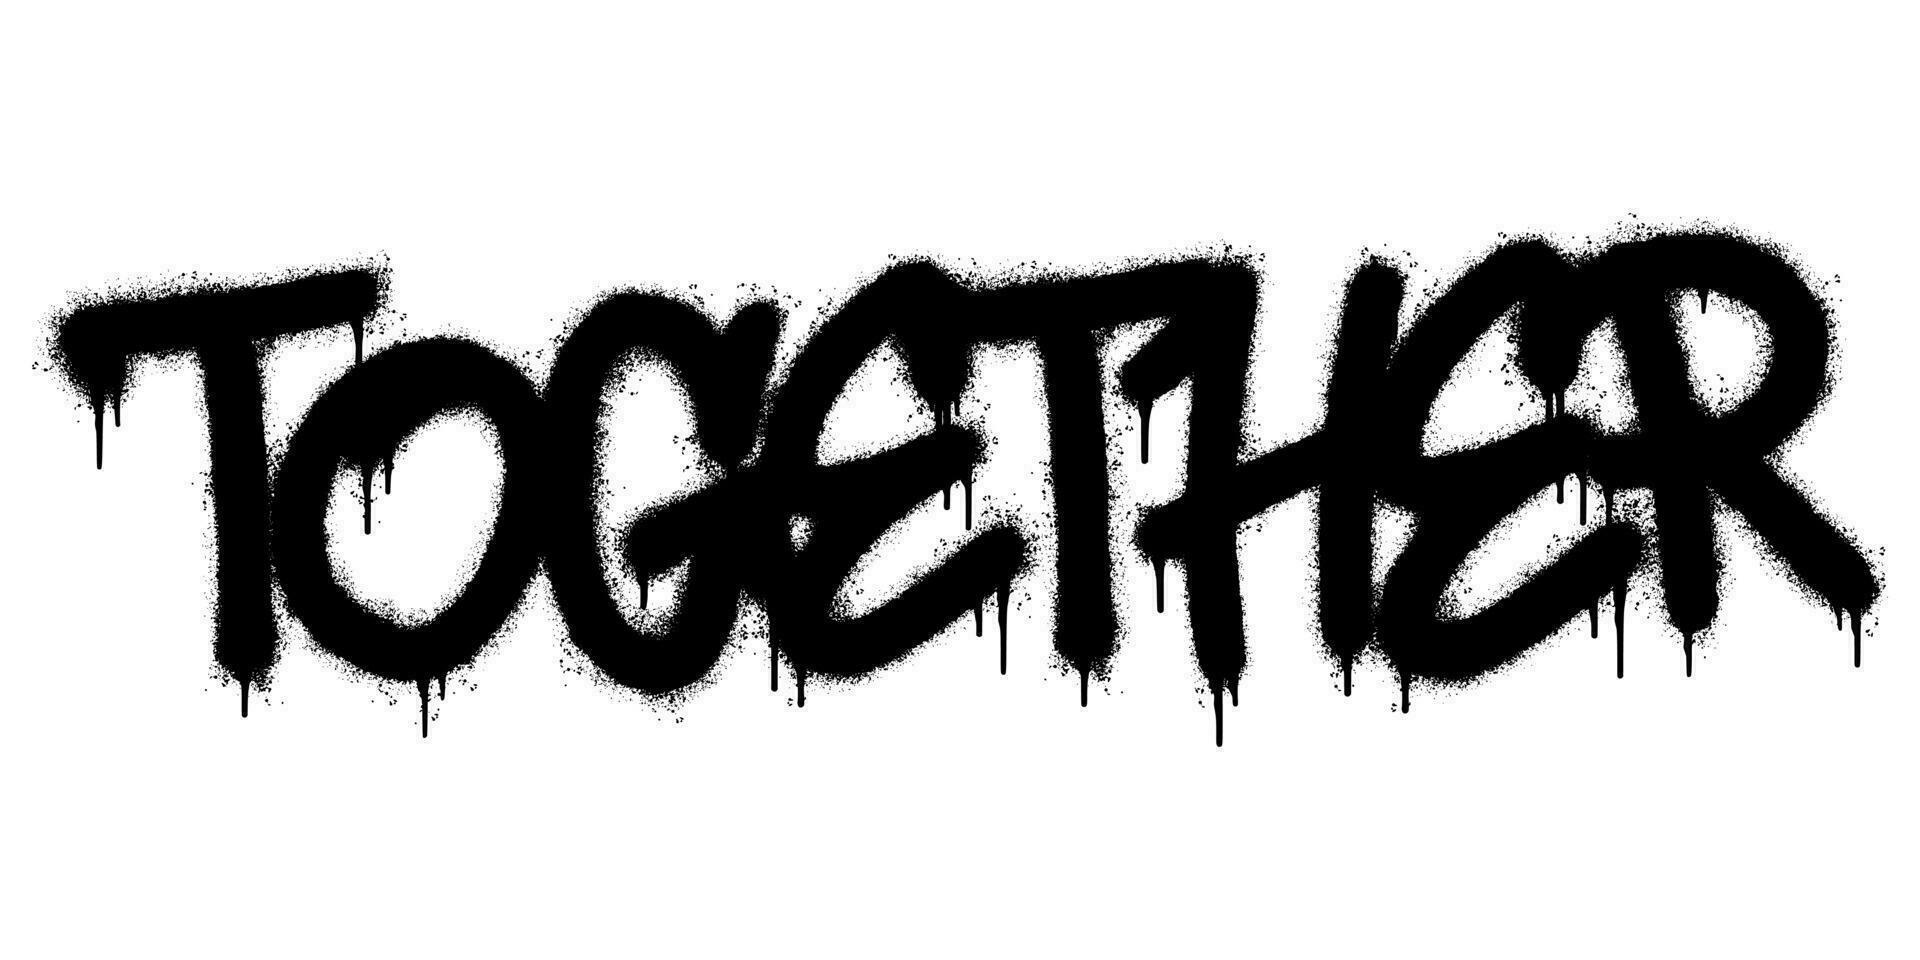 Spray Painted Graffiti Together Word Sprayed isolated with a white background. graffiti font Together with over spray in black over white. vector